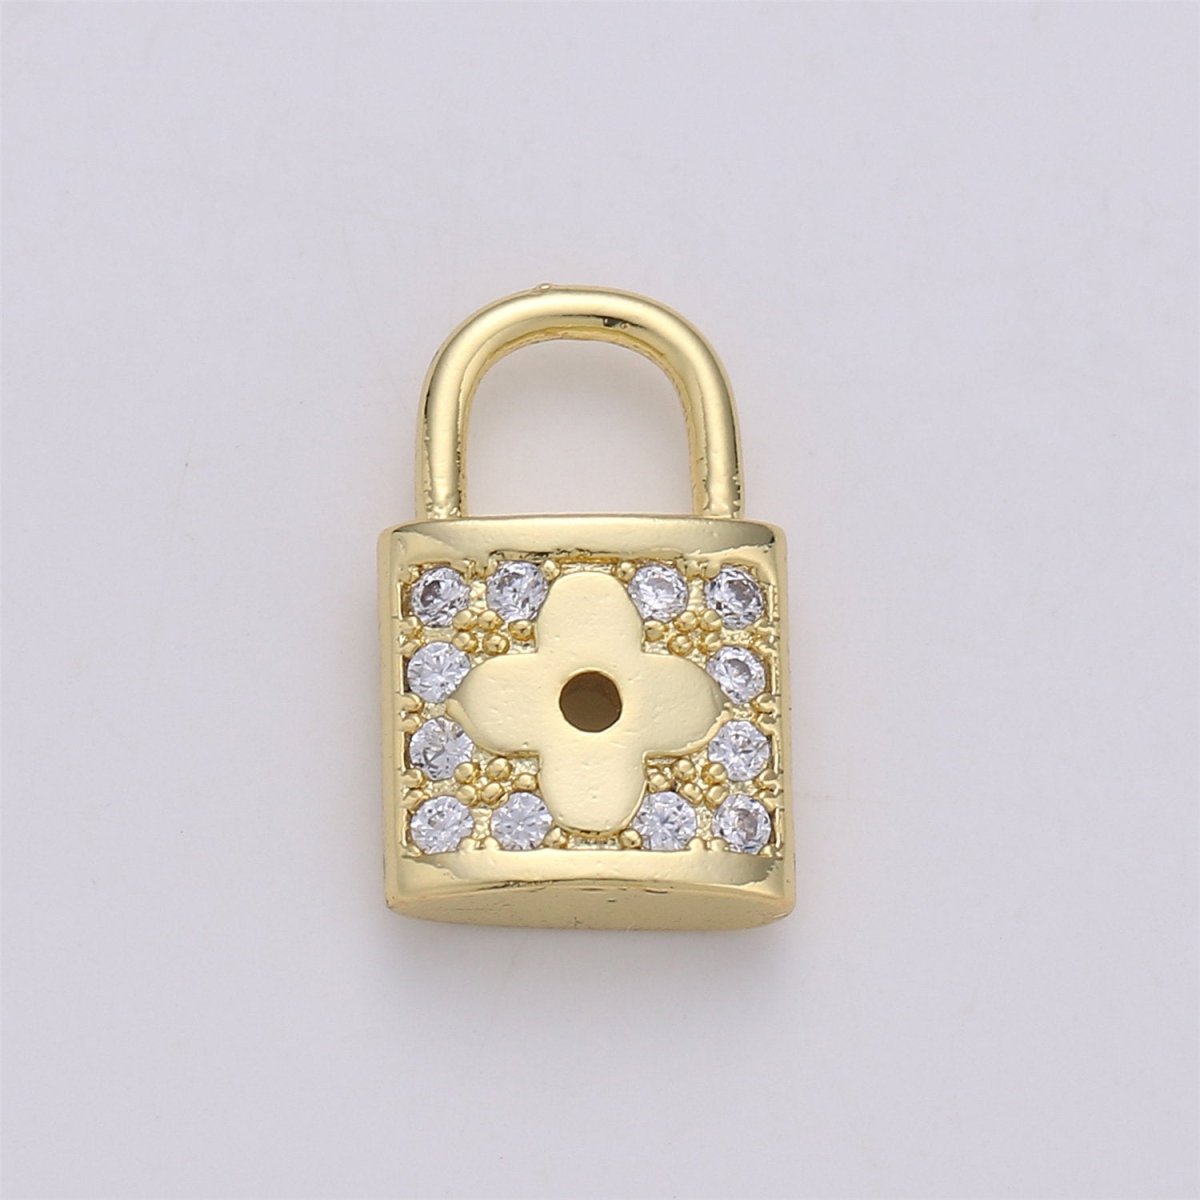 Dainty Micro Pave padlock charm 16x10mm 14K gold Filled Nickel free, Cubic Clover padlock pendant for Necklace Earring Bracelet Component K-343 - DLUXCA